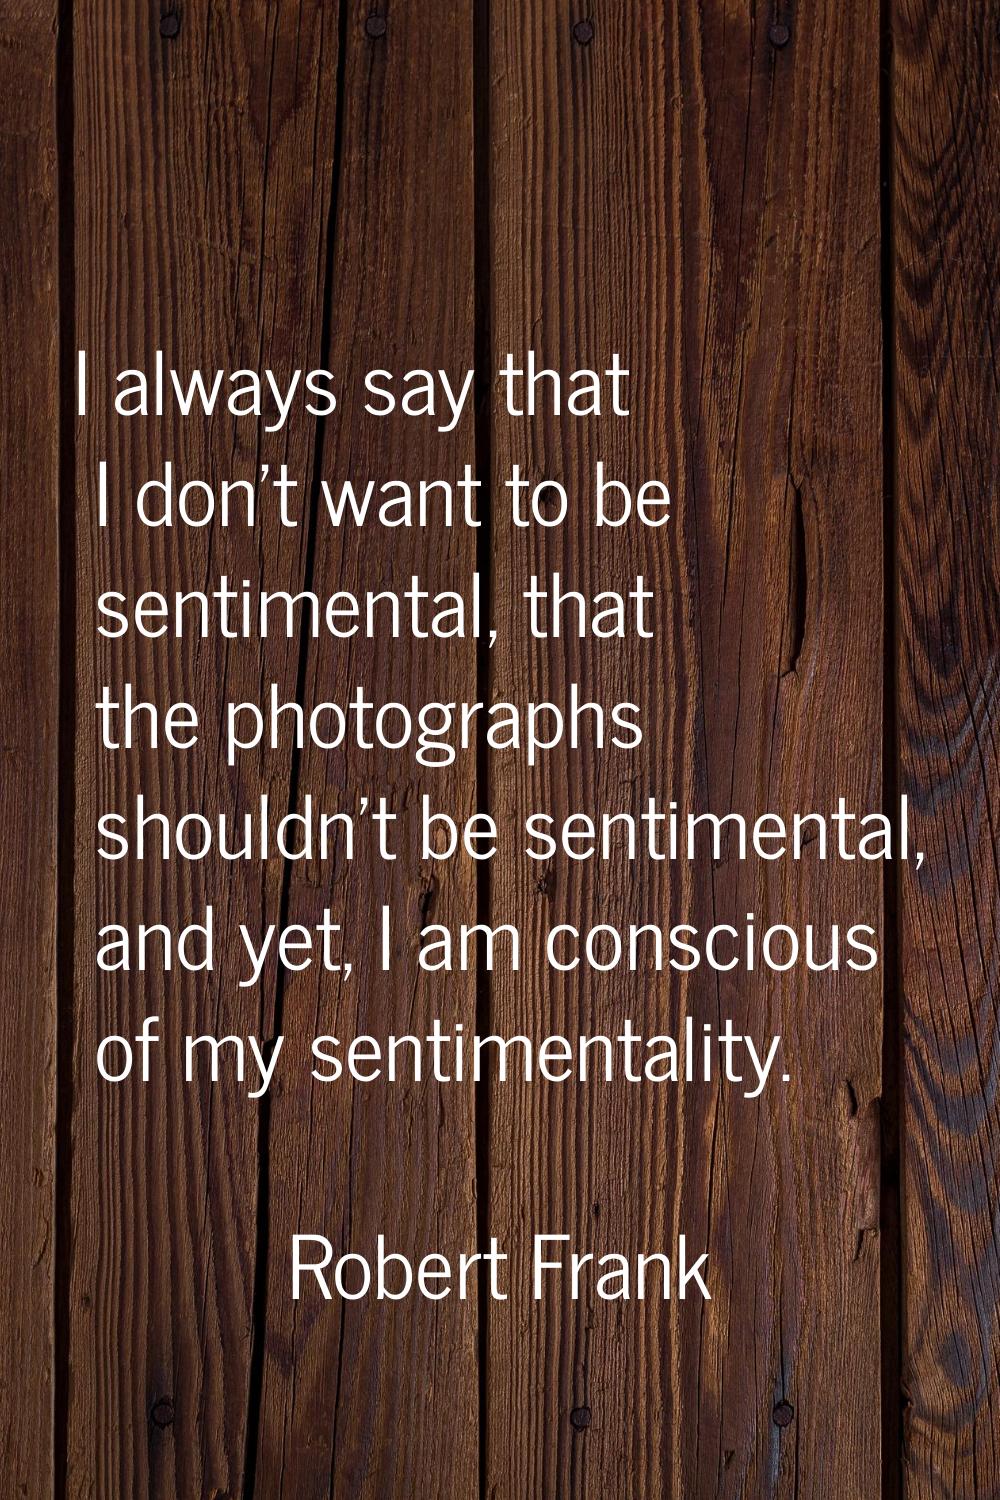 I always say that I don't want to be sentimental, that the photographs shouldn't be sentimental, an